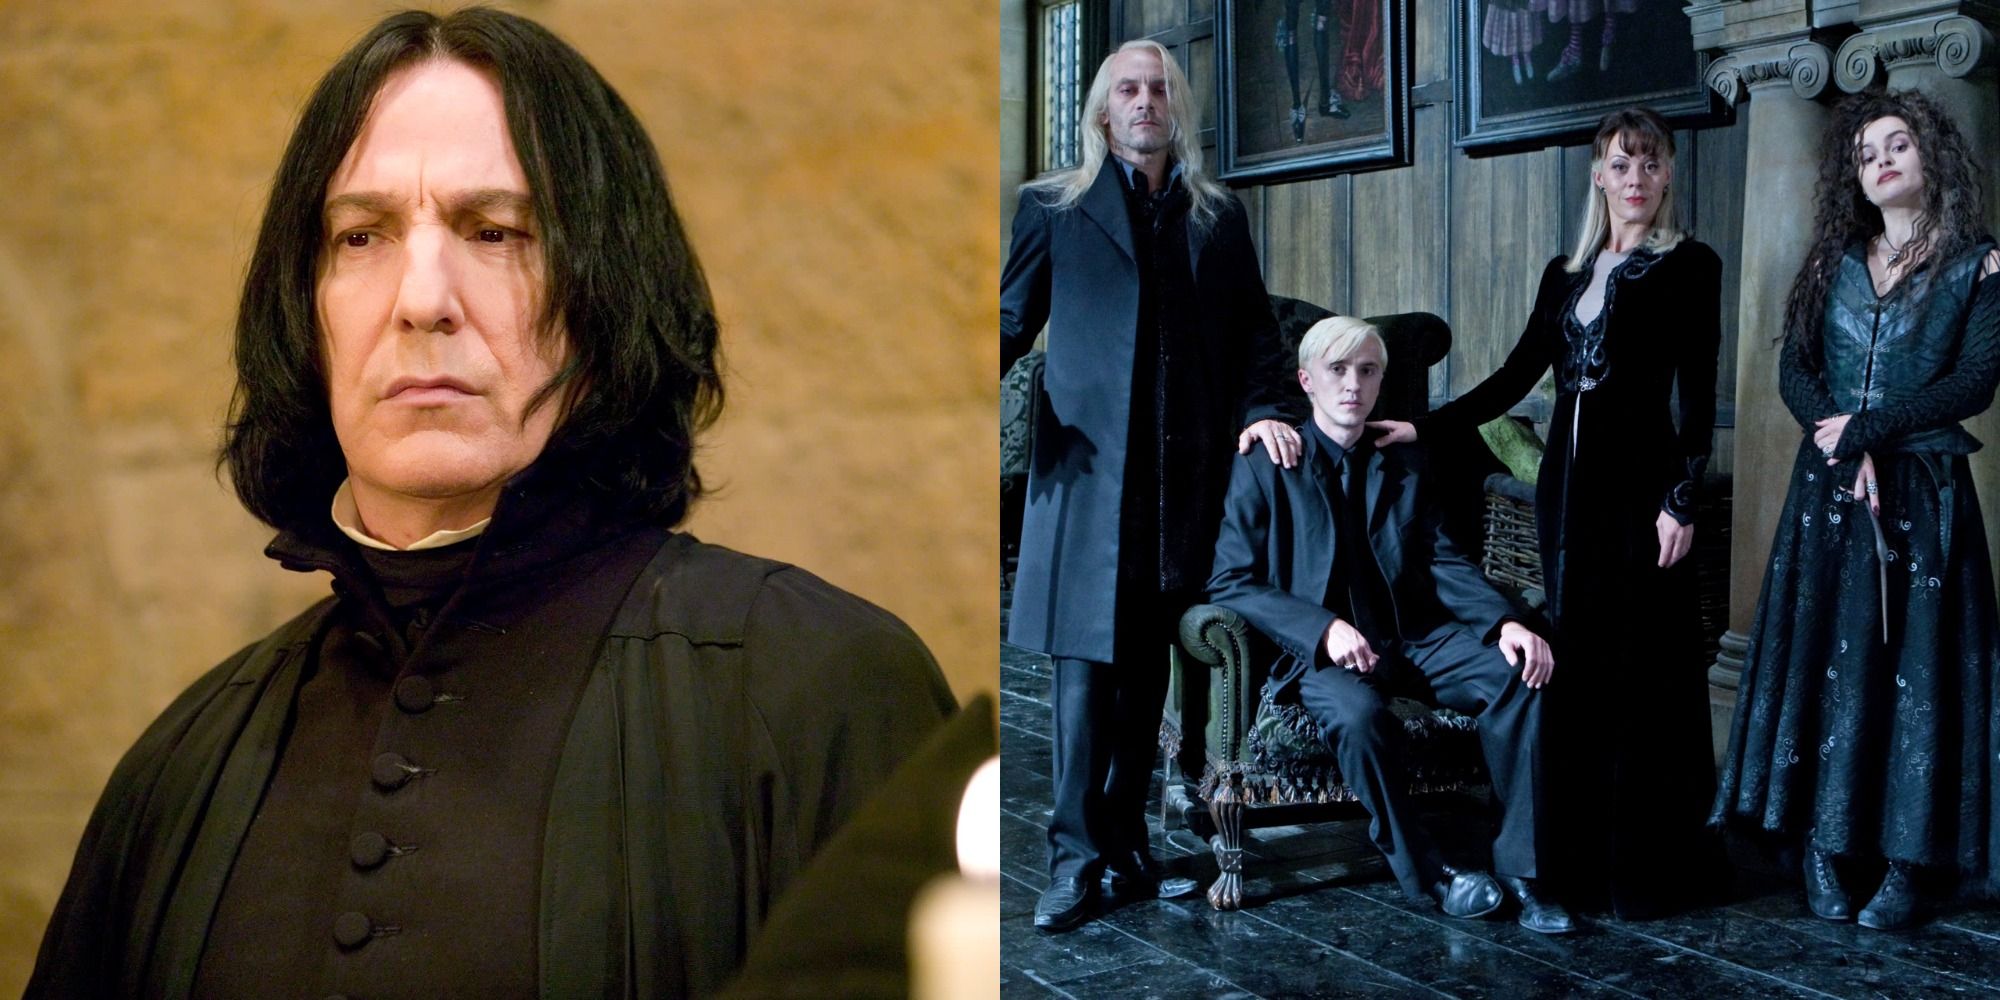 Split image showing Snape and the Malfoy family in Harry Potter